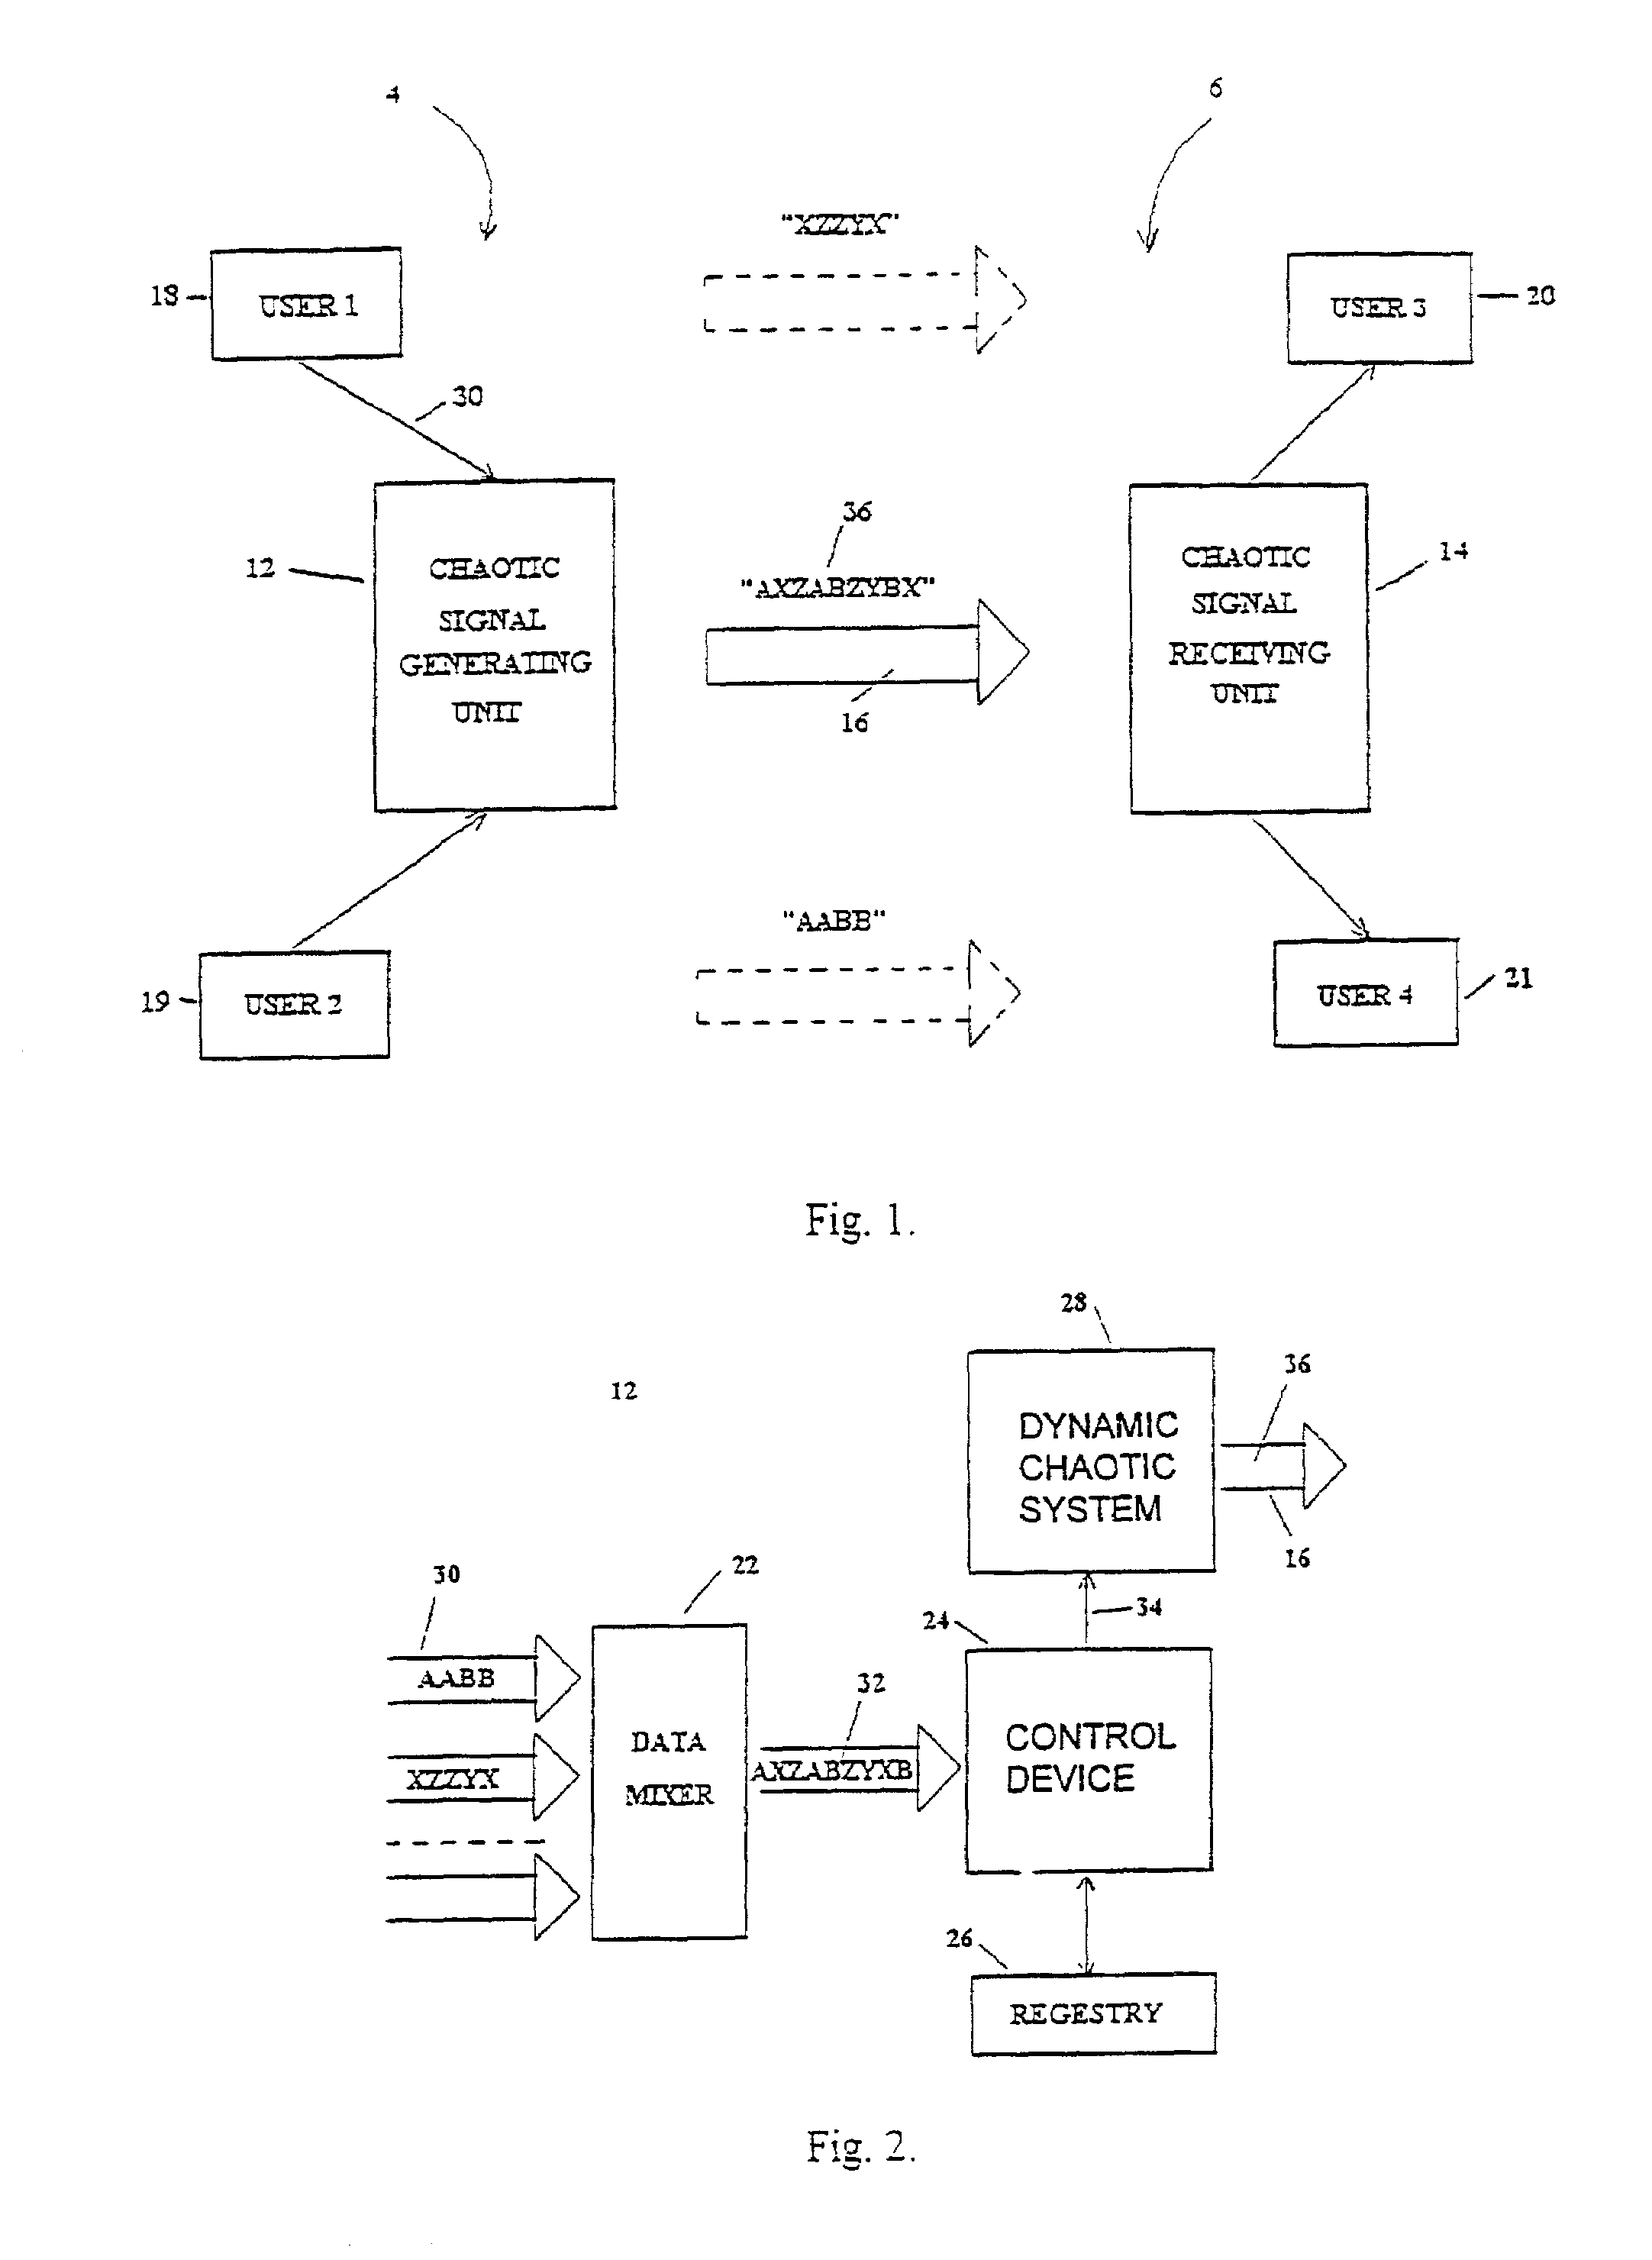 Multiple access communication system using chaotic signals and method for generating and extracting chaotic signals